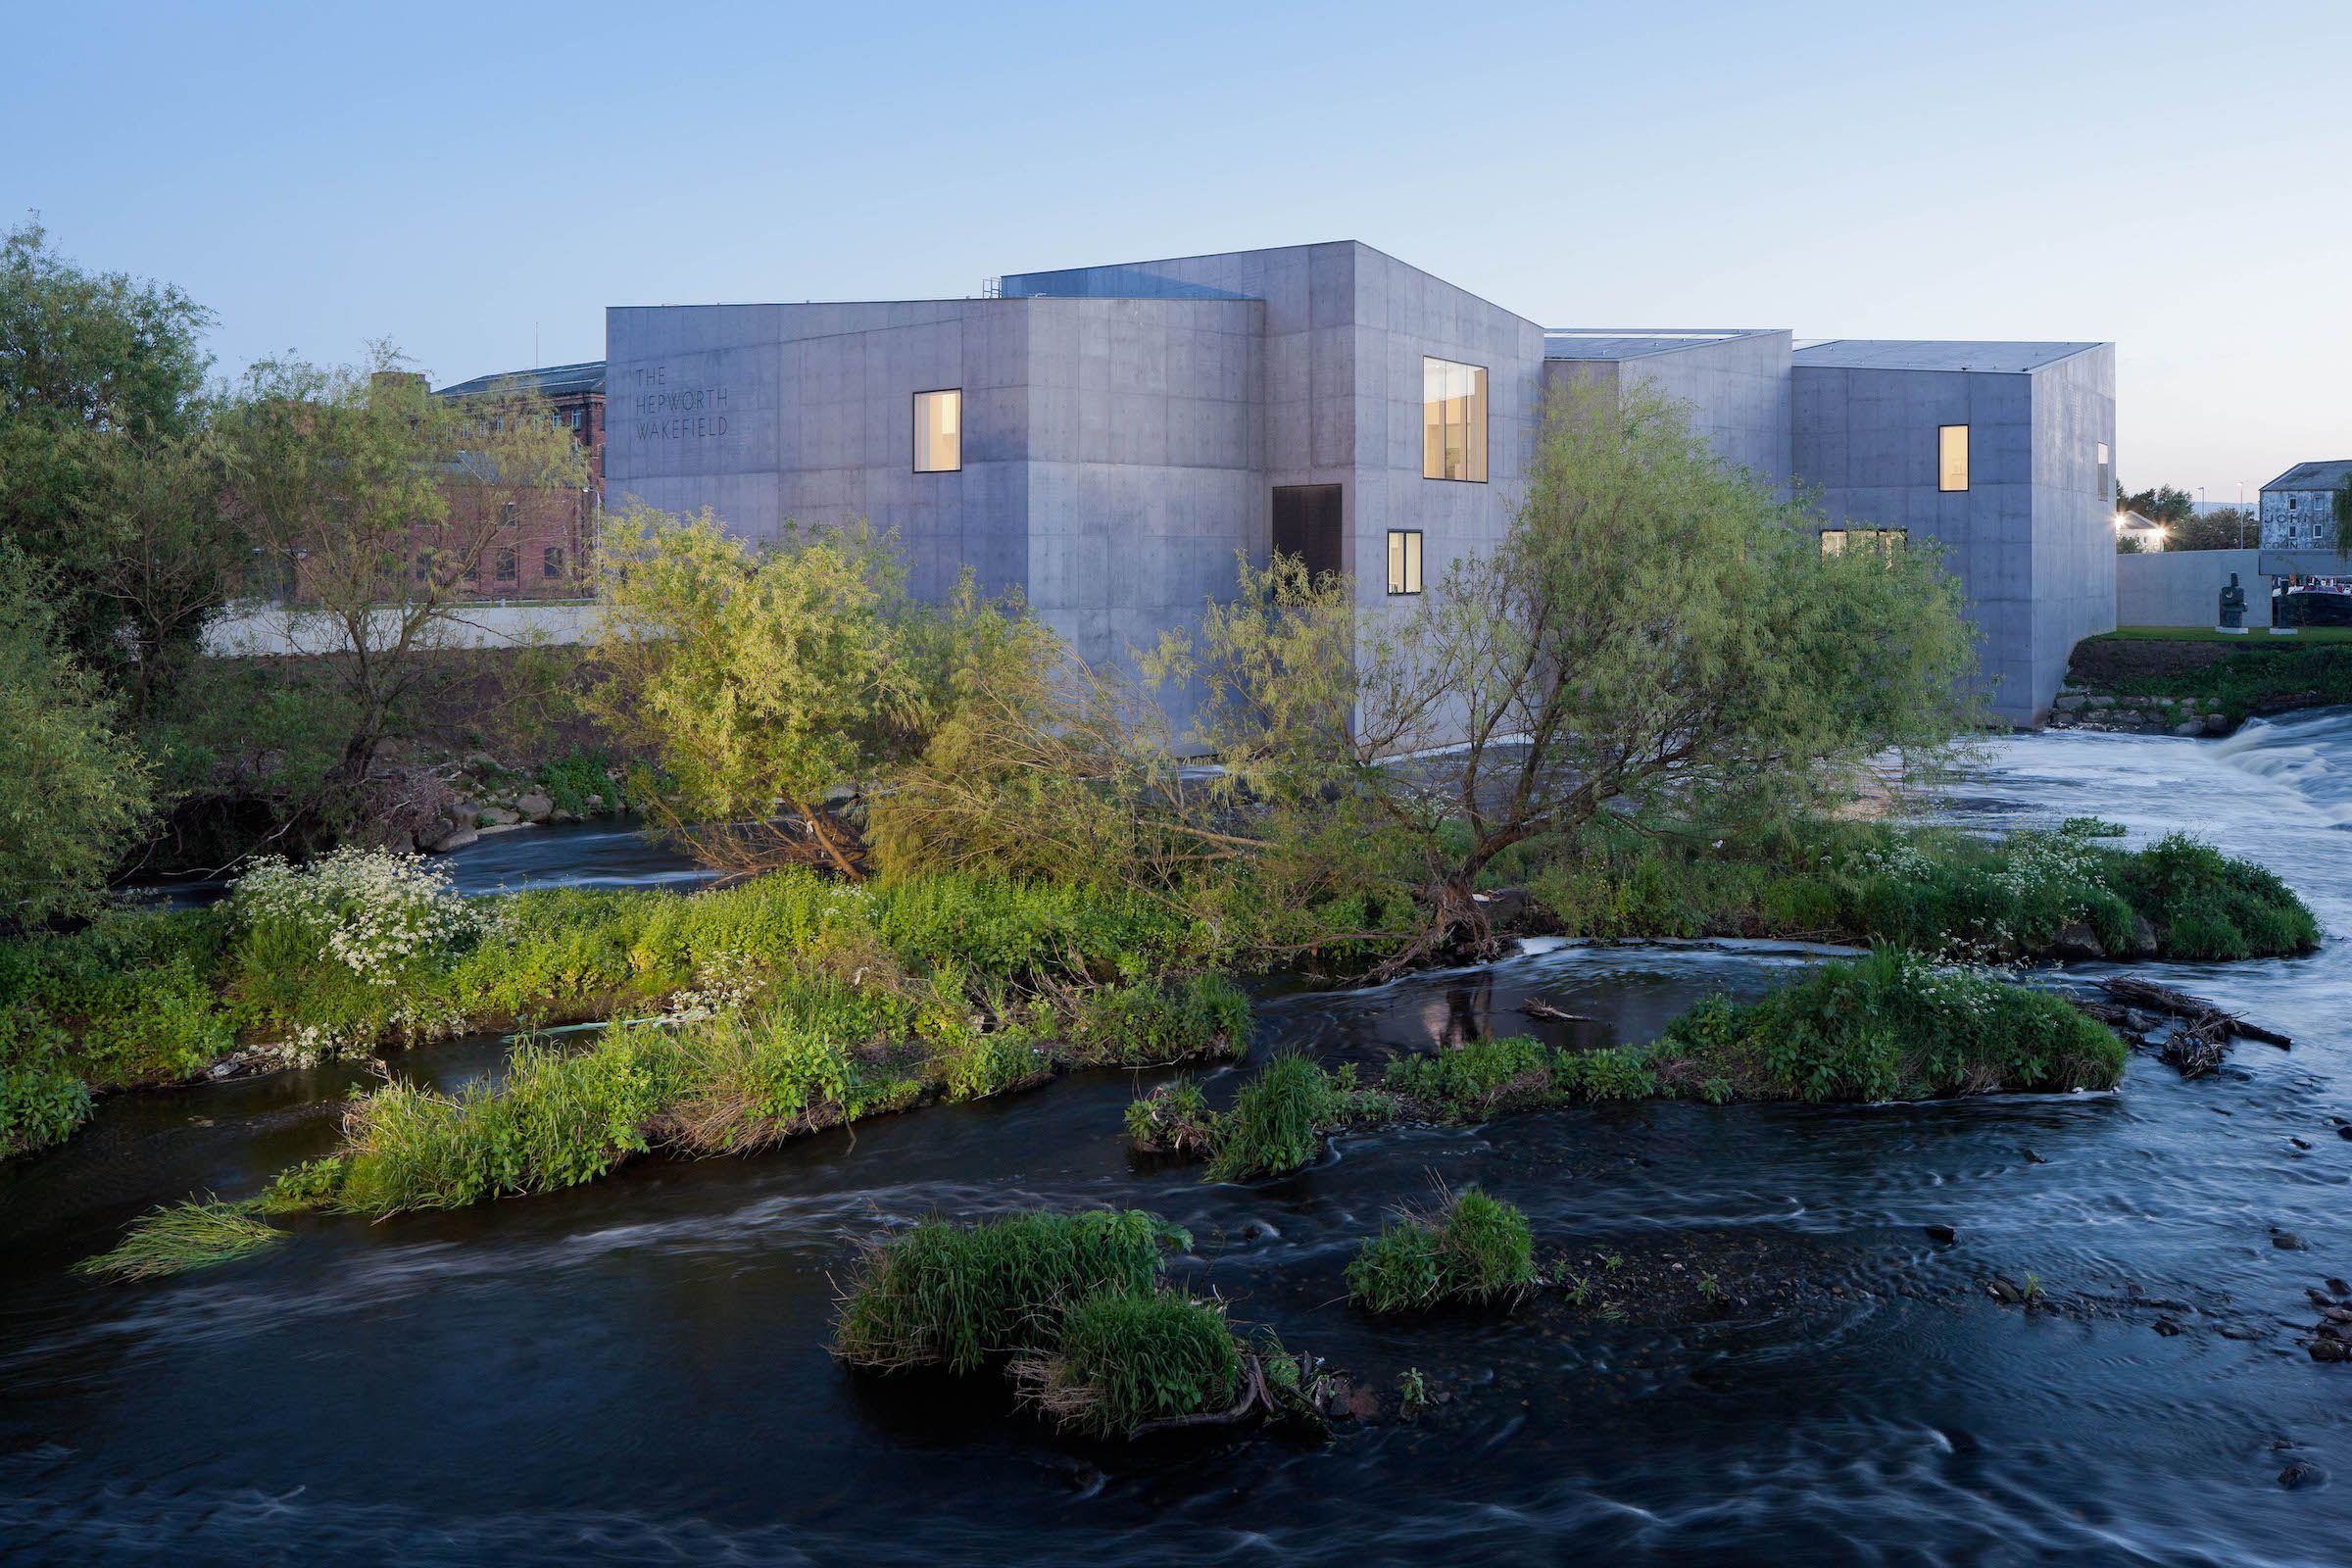 The Hepworth Wakefield 3 - David Chipperfield named 2023 Pritzker Architecture Prize laureate